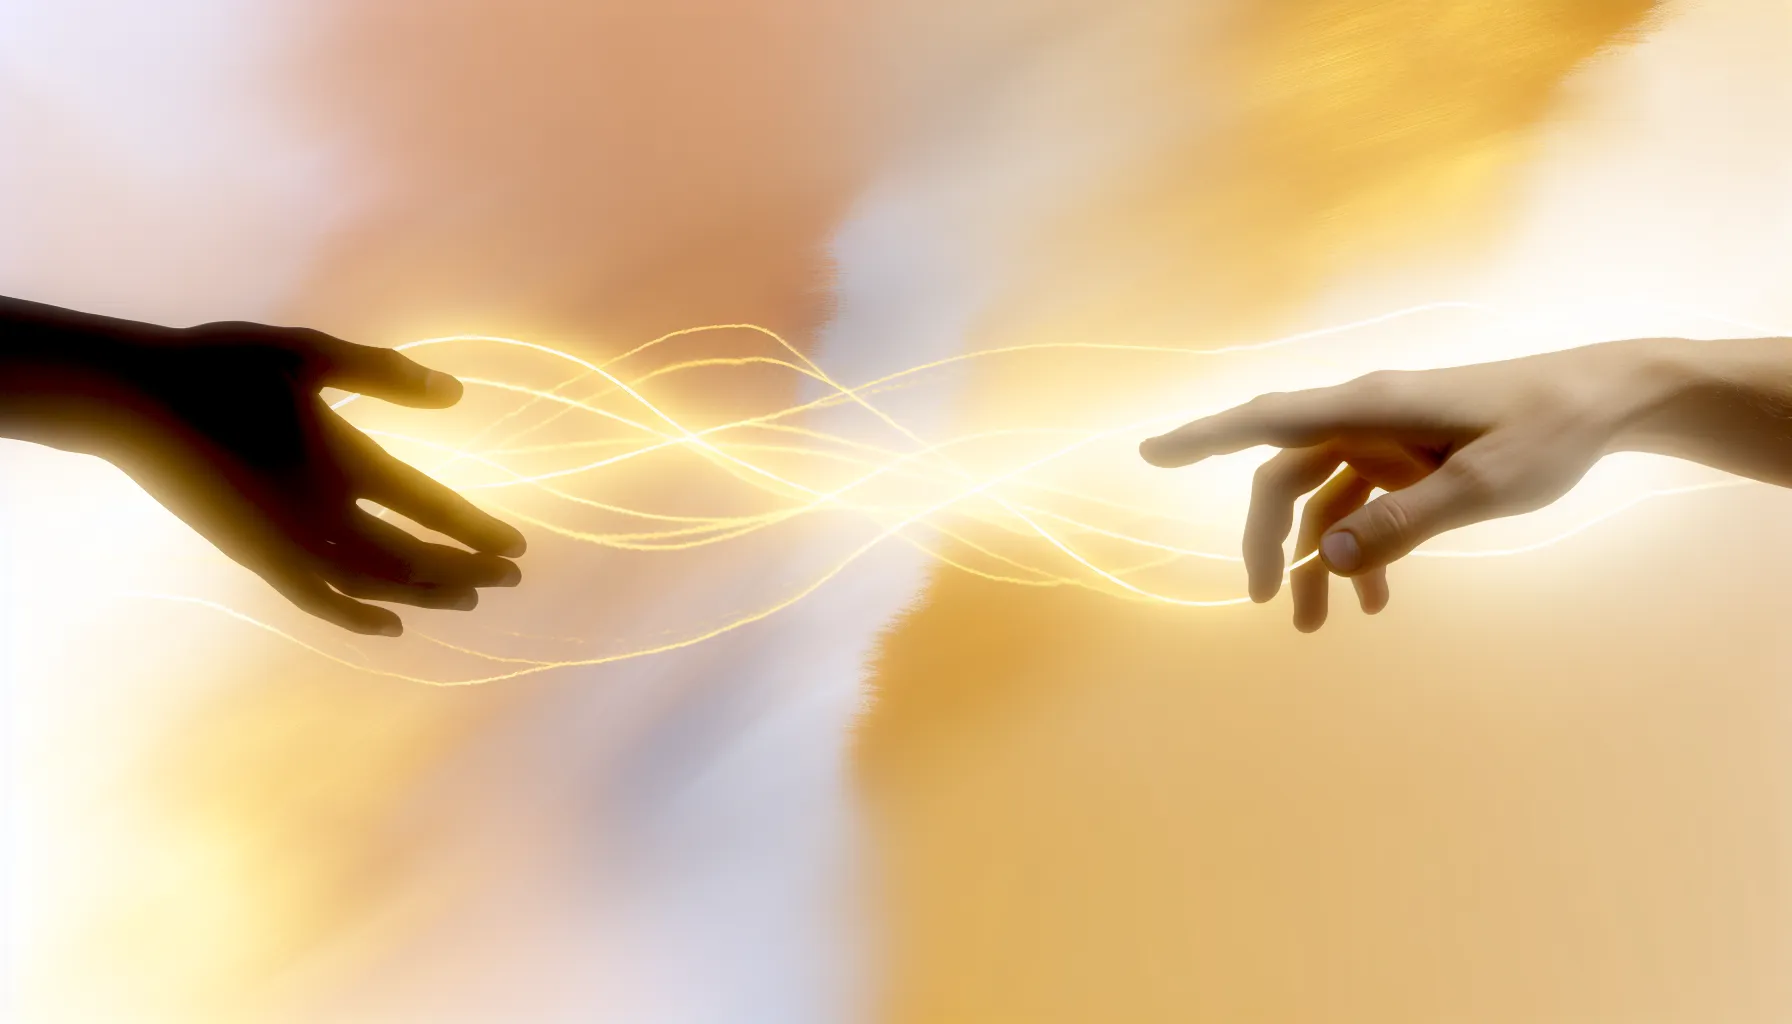 <strong>The Golden Thread of Trust:</strong> This image, with its subtle interplay of light and connection, mirrors the journey of building trust - a delicate yet powerful bond that transforms the essence of relationships.